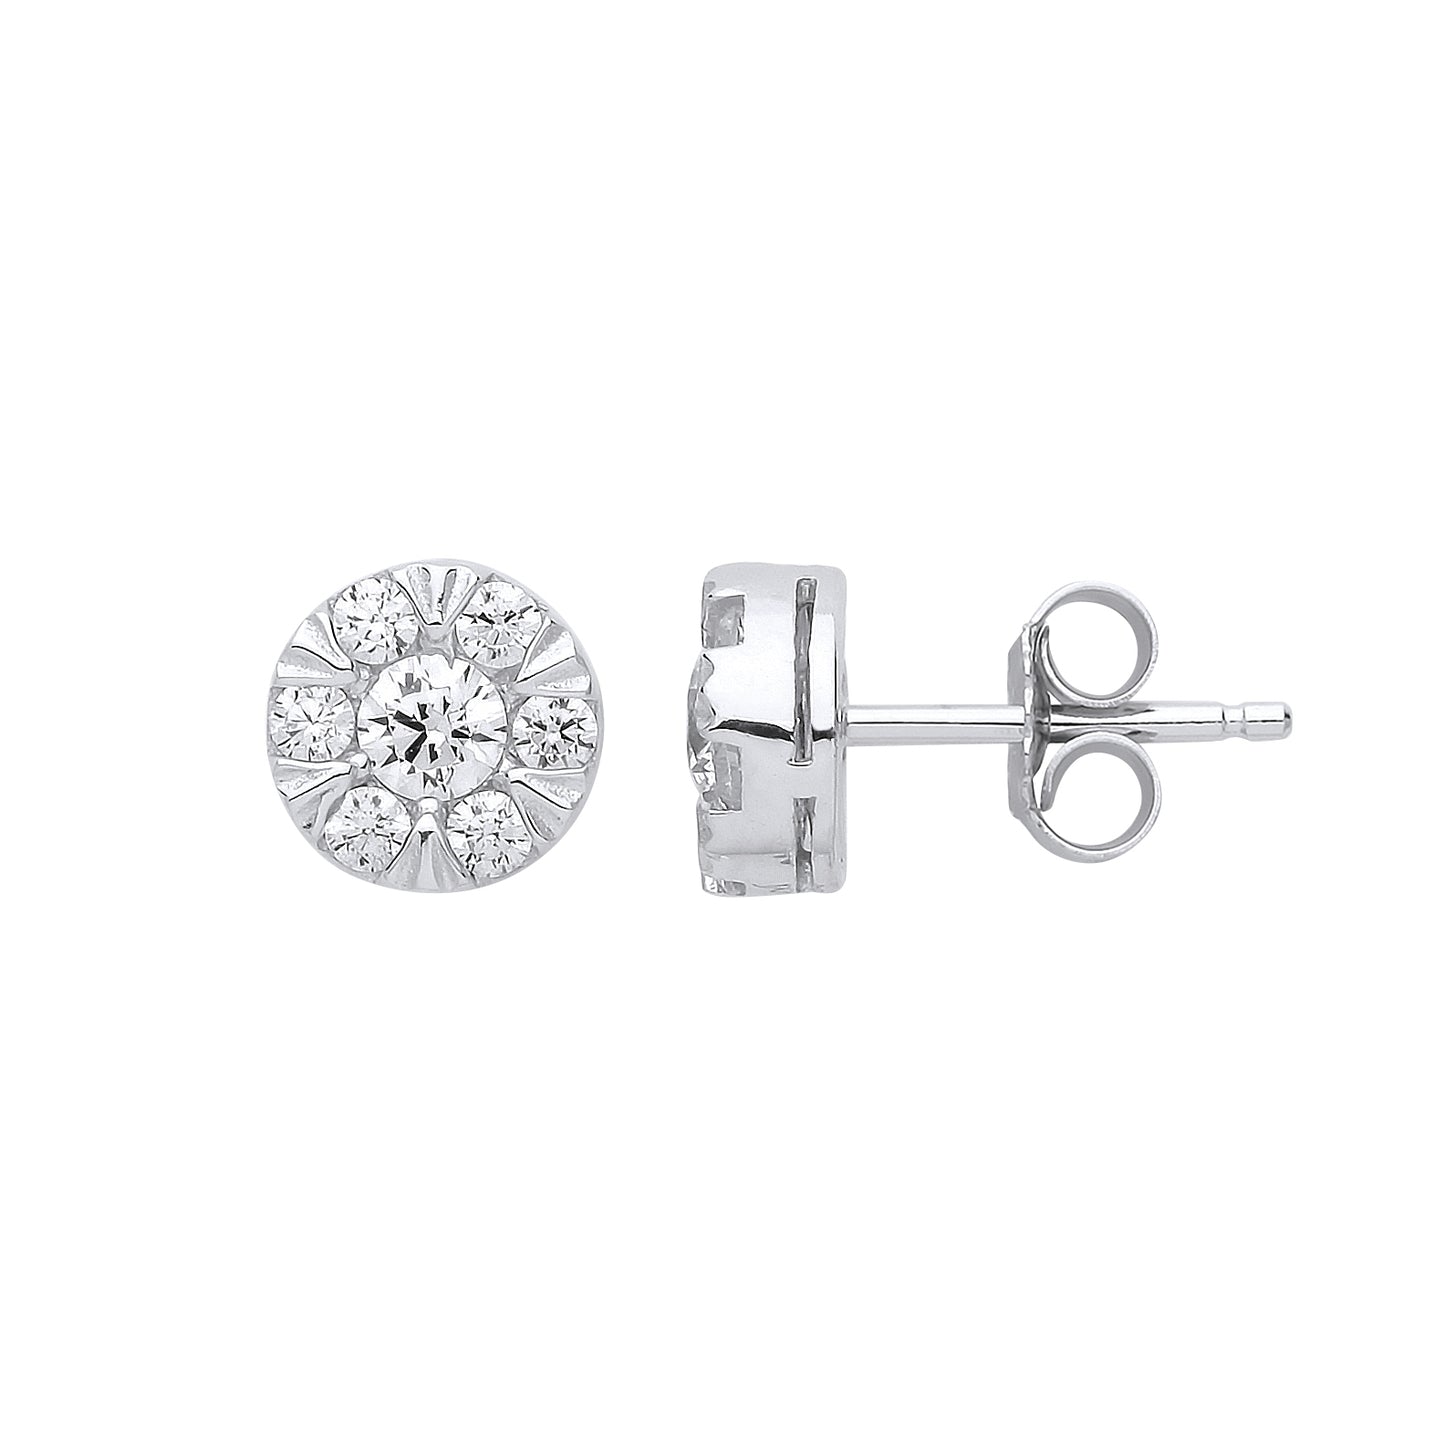 Silver  CZ Solitaire Cluster Stud Earrings - GVE818